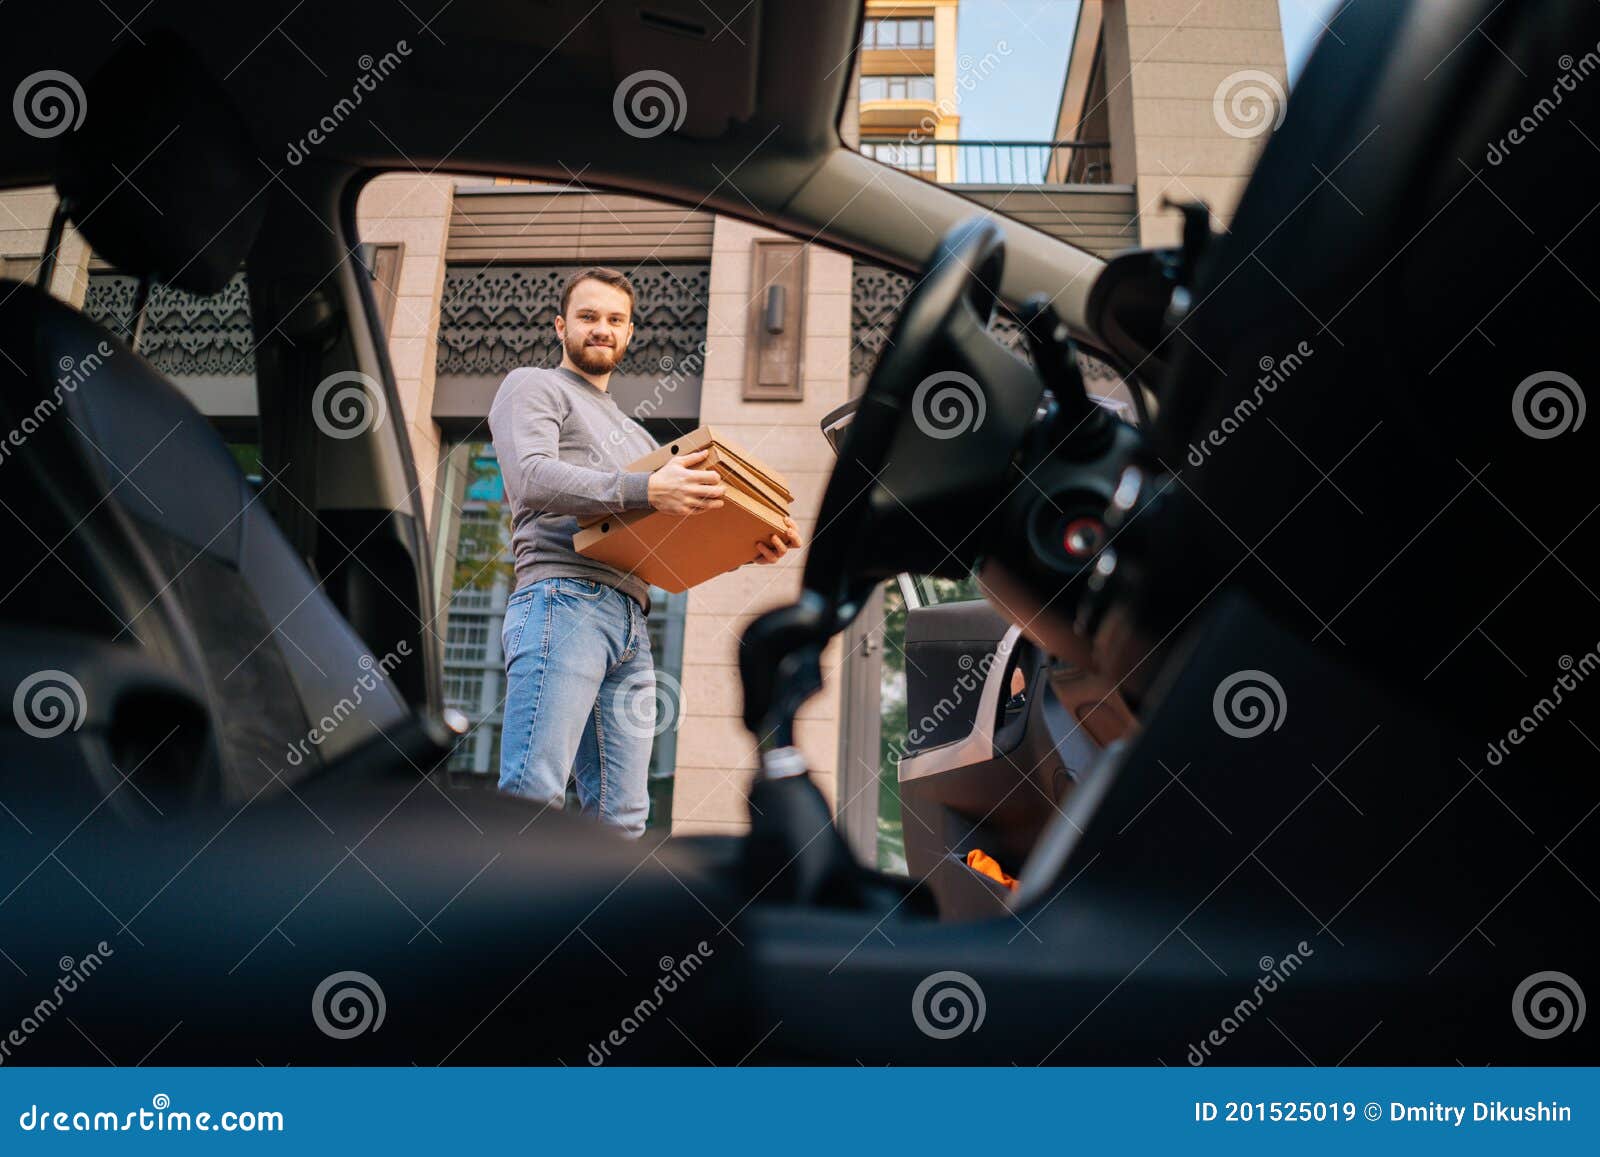 Portrait Of Handsome Caucasian Delivery Man Standing At City Street And Holding Boxes With Hot